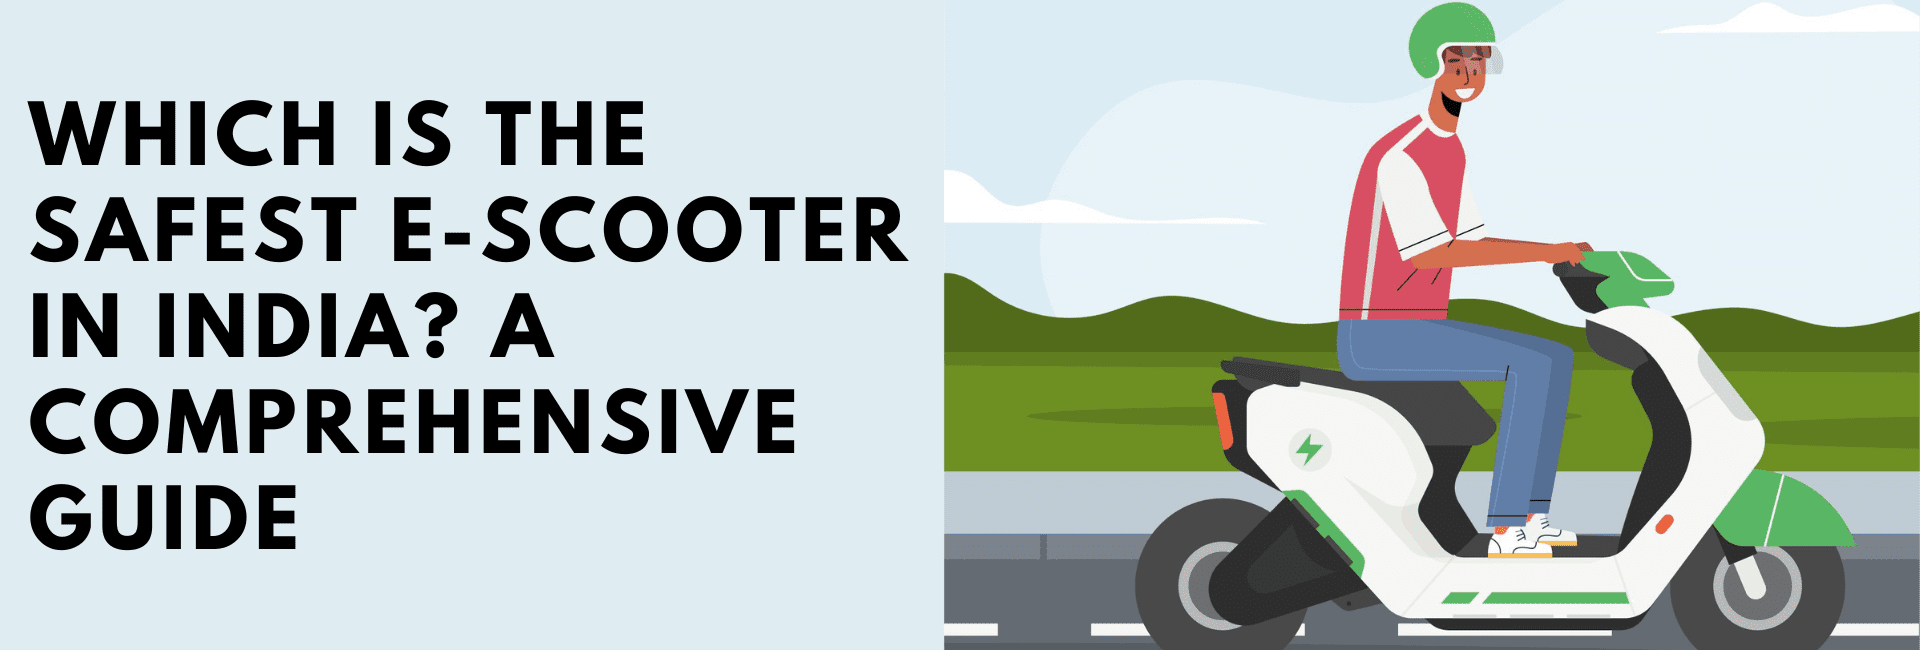 Which is the Safest E-Scooter in India? A Comprehensive Guide